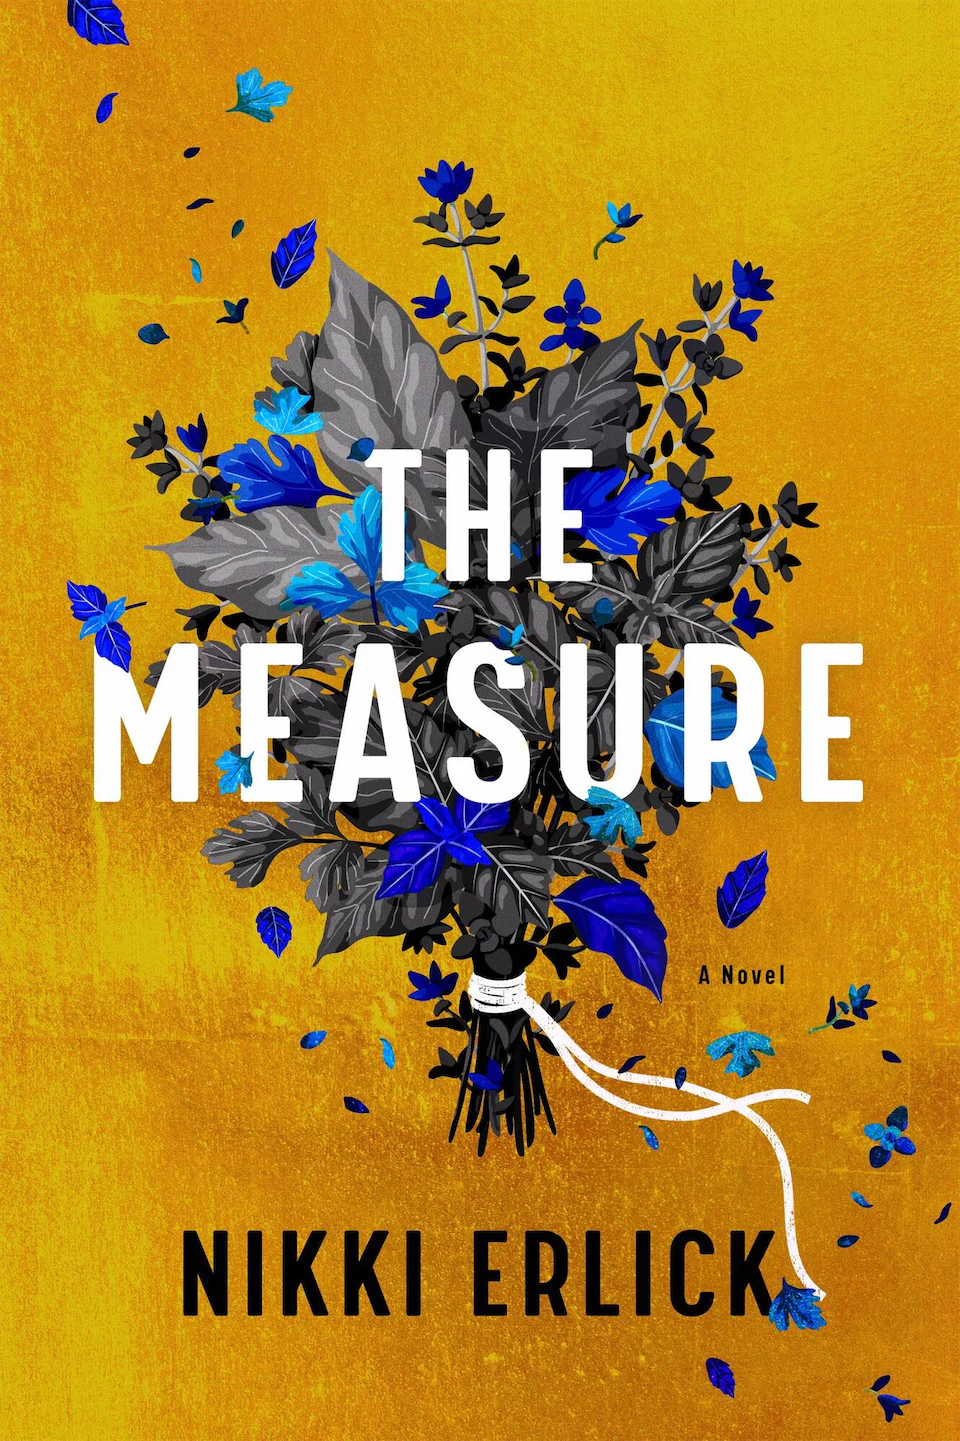 The Measure by Nikki Erlick finished on 2023 Jul 30